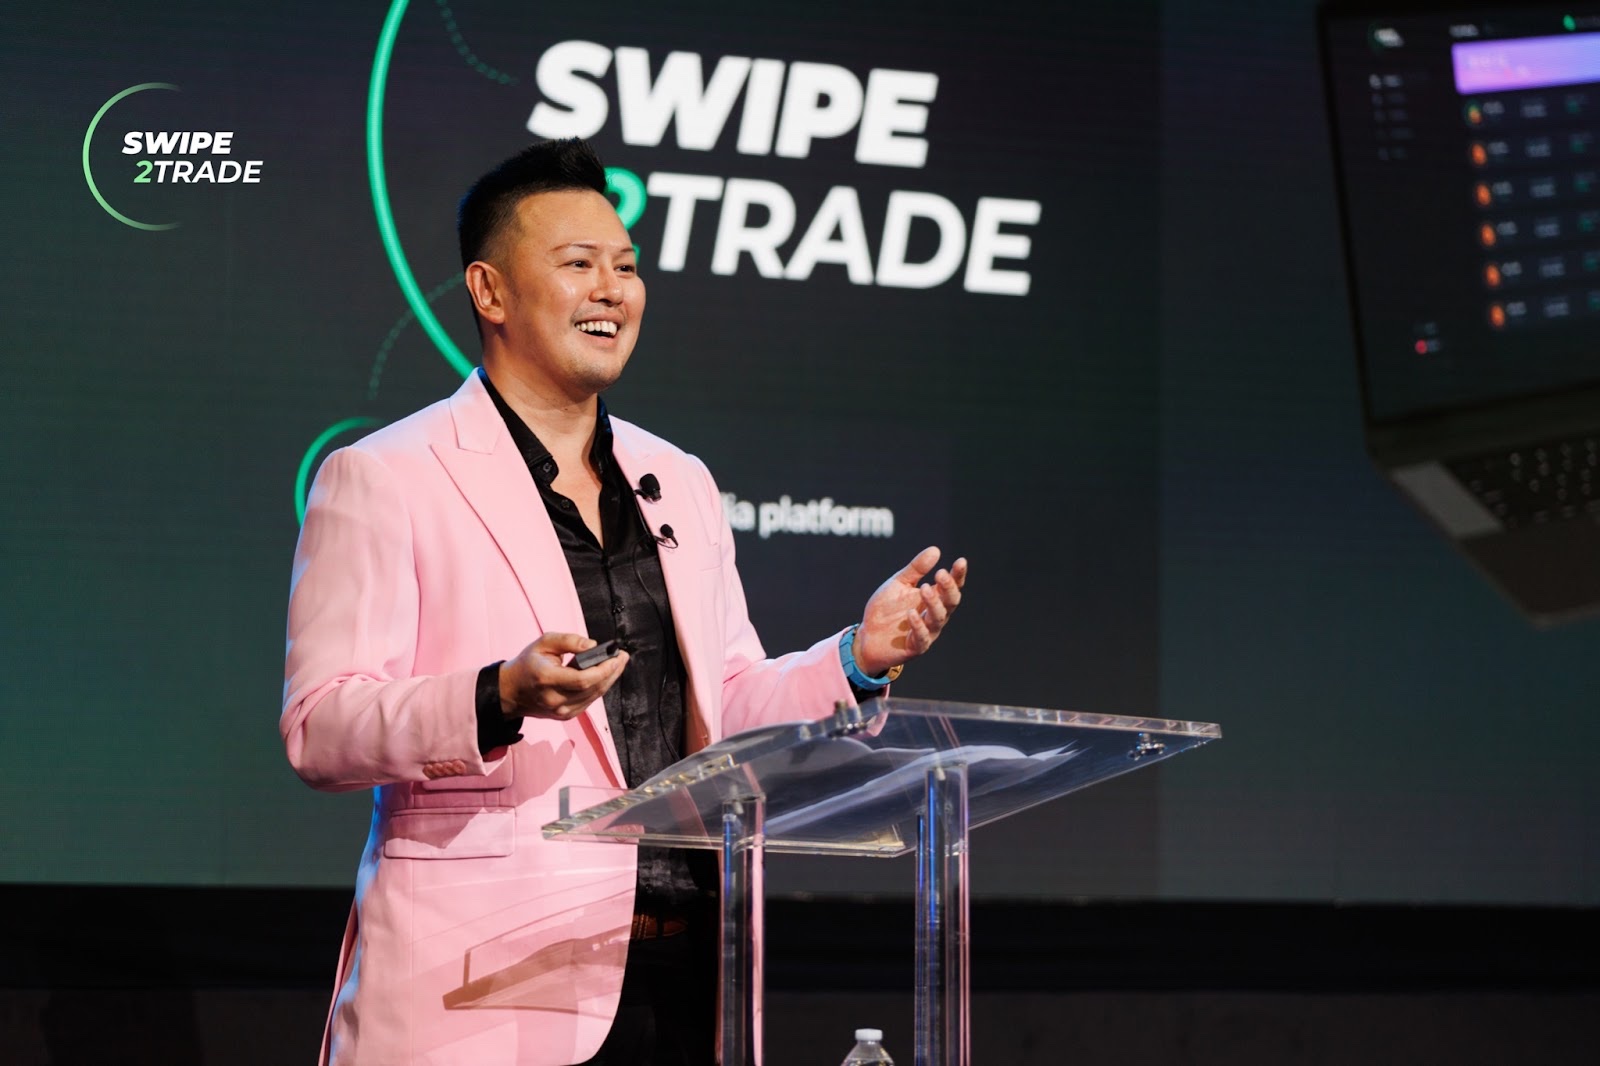 Herbert The Bitcoin Man Sim, CEO of Swipe2Trade, was in Austin, Texas to showcase the platform and present it to the media.